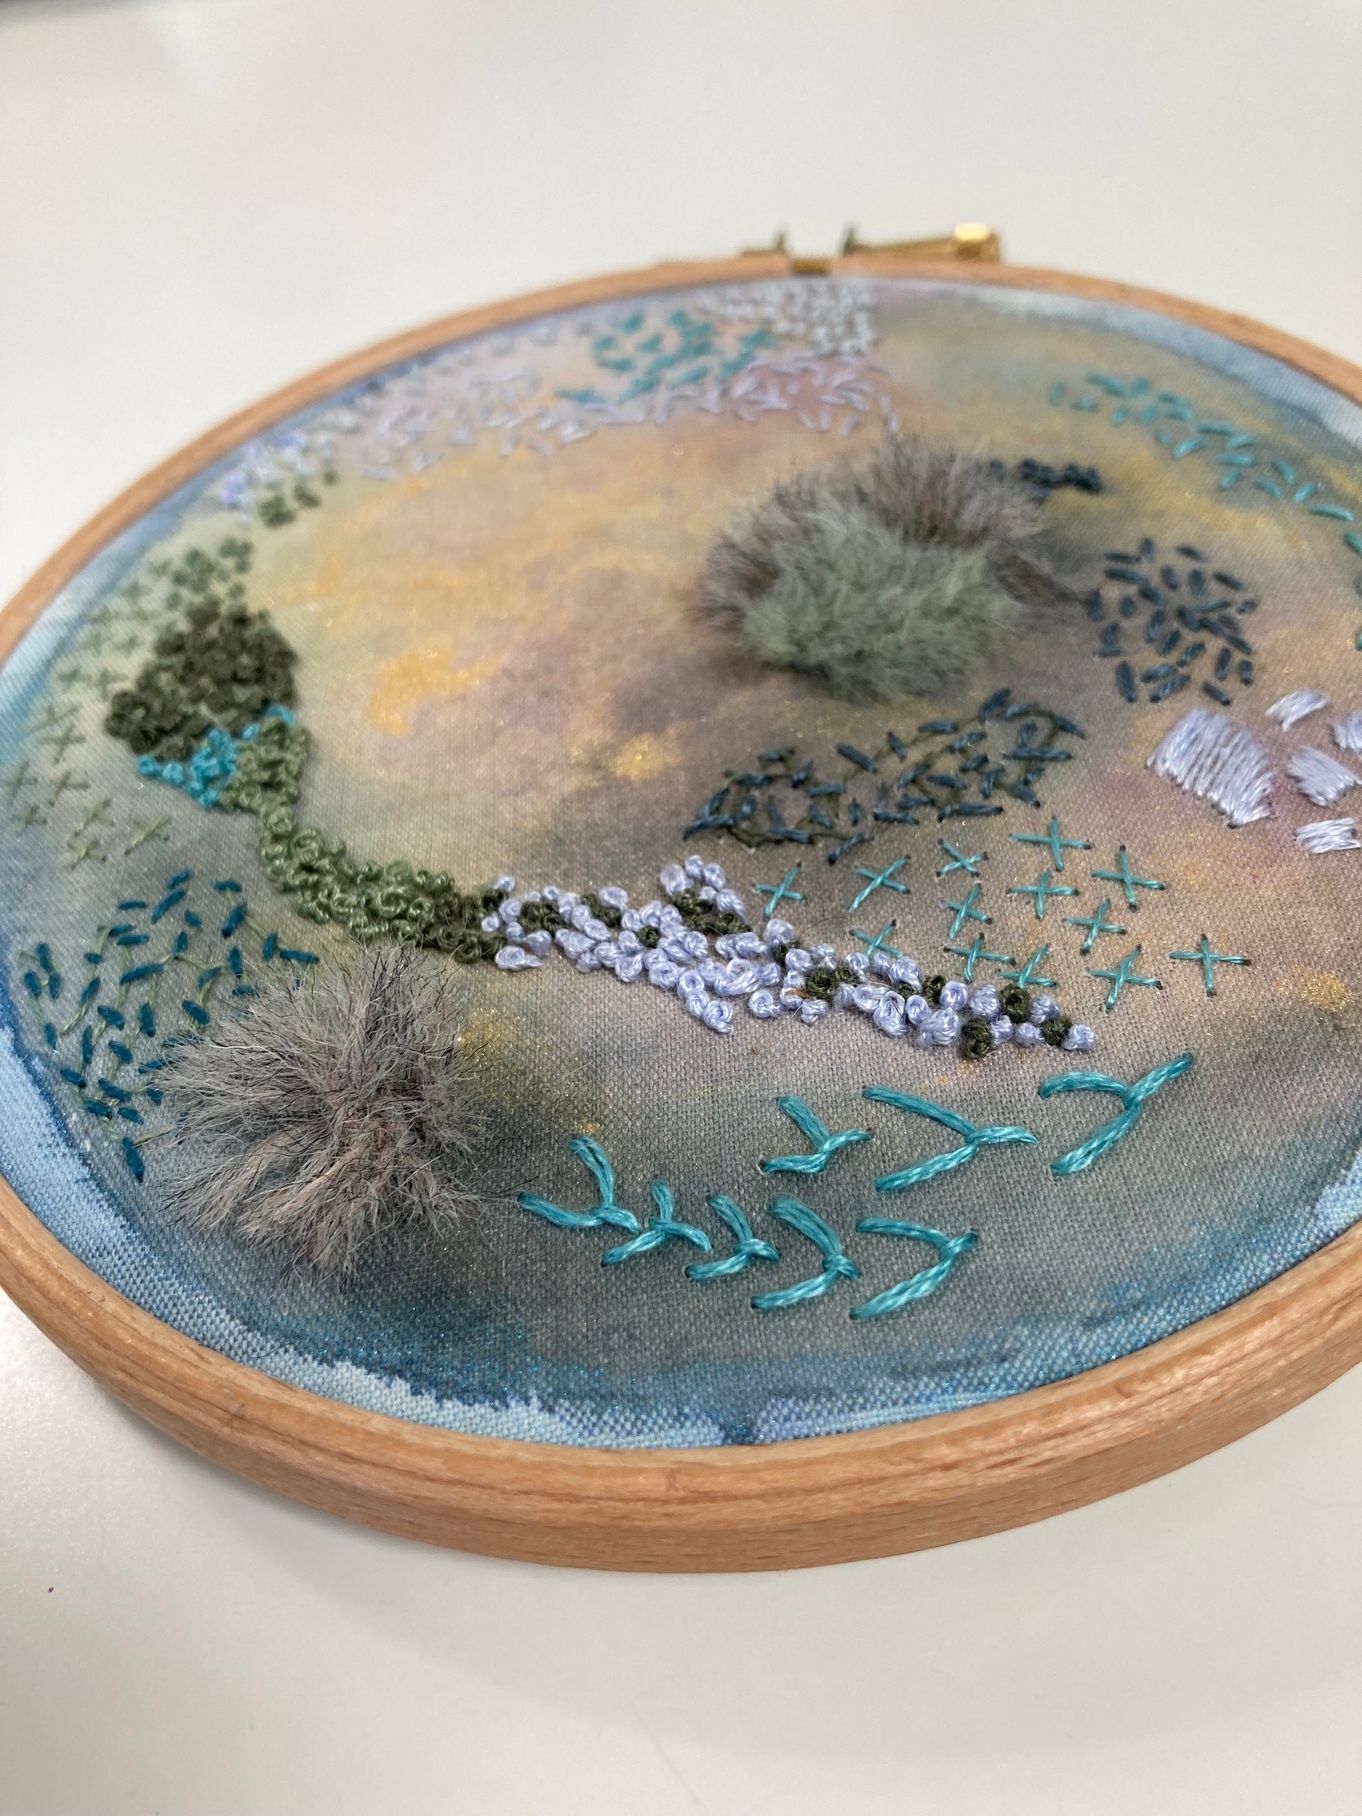 Textured Embroidery & Abstract Mark Making class with Victoria Merness